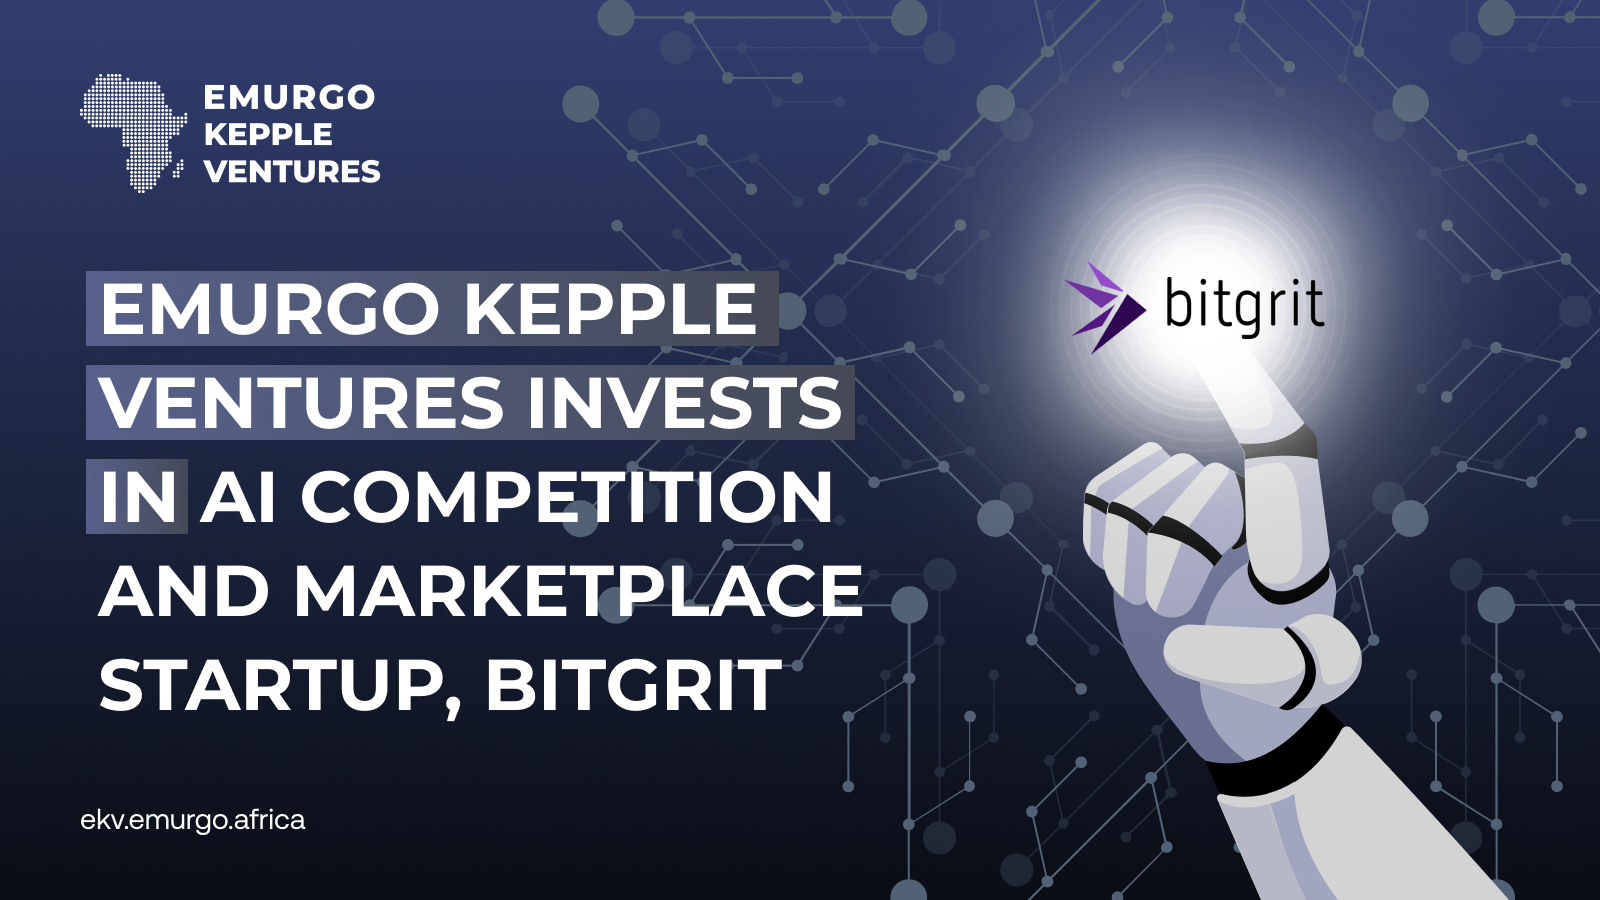 Emurgo Kepple Ventures Invests in AI competition and Marketplace Startup, bitgrit